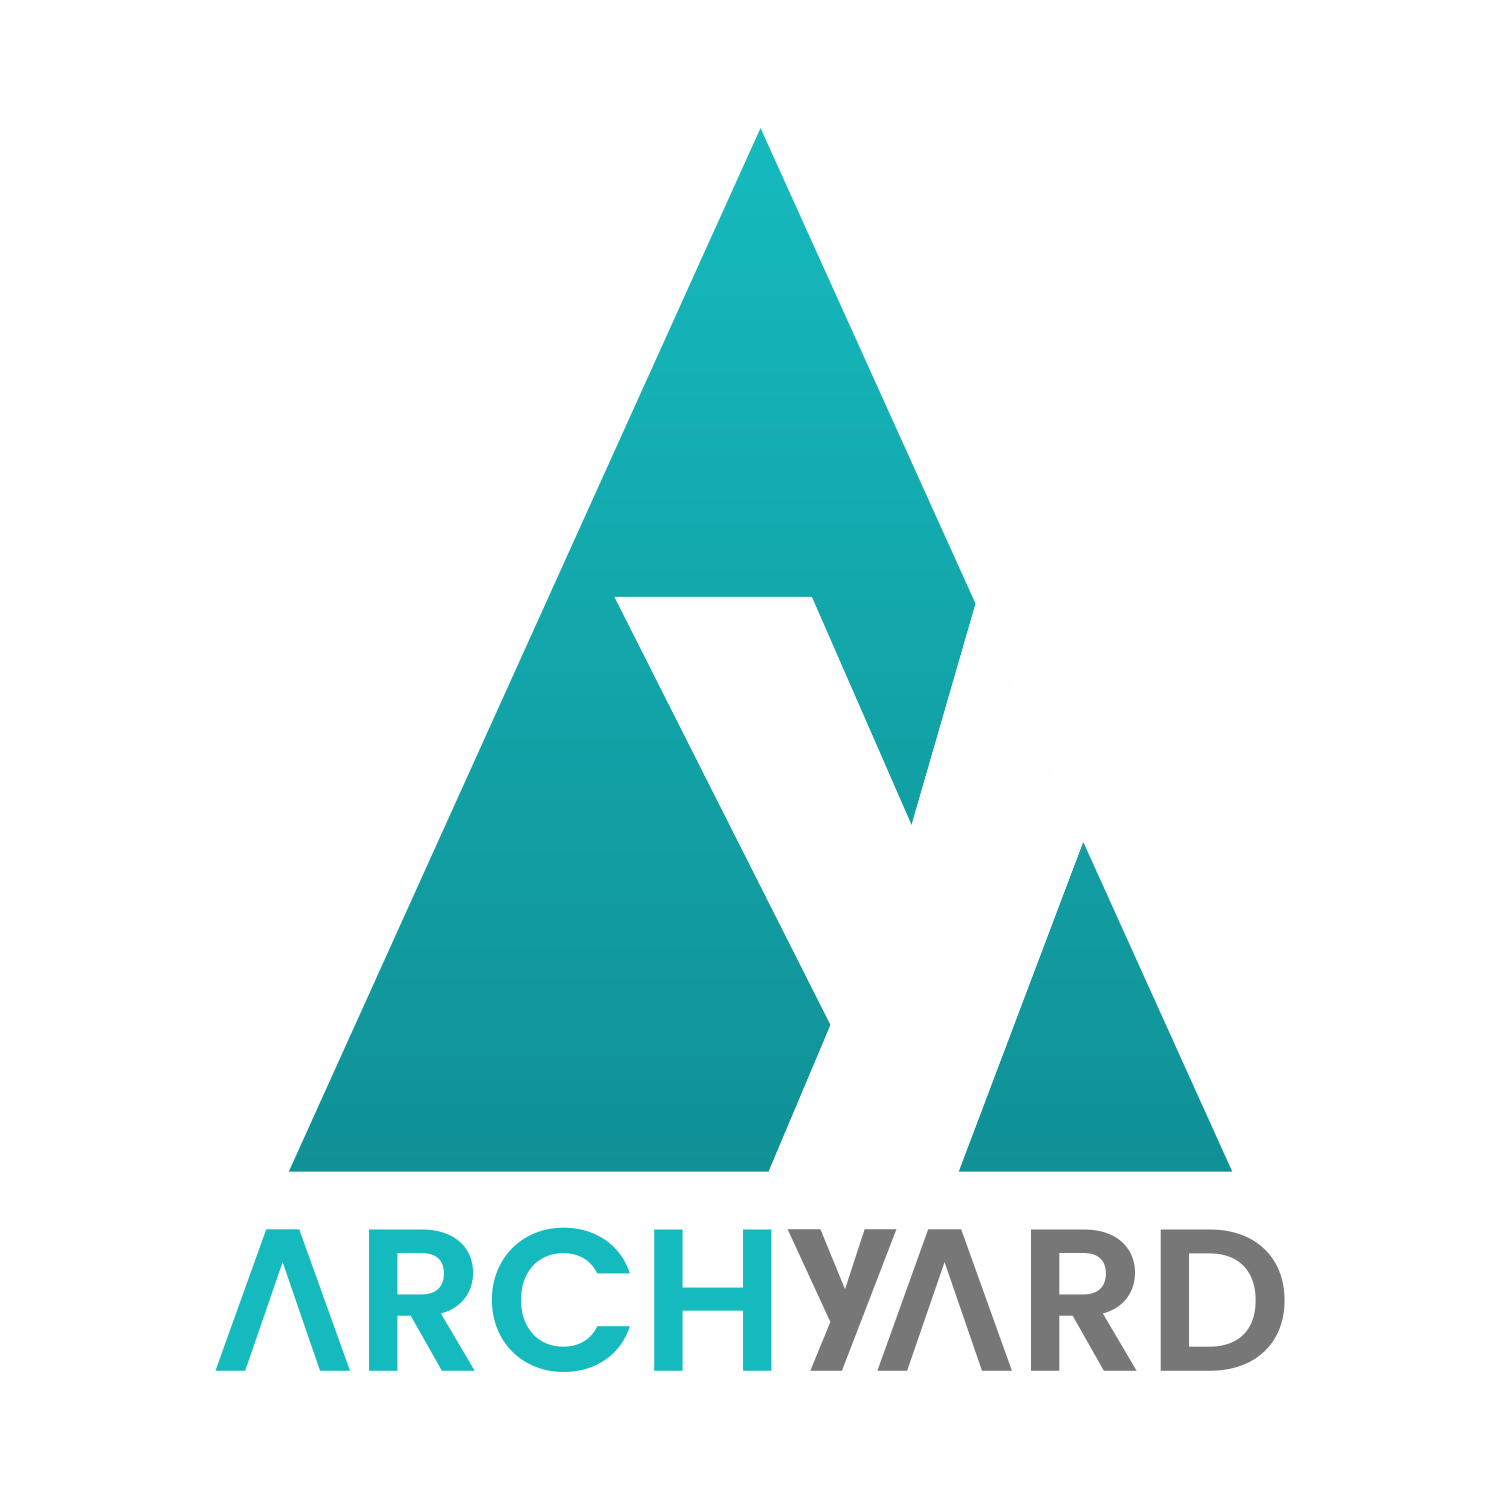 ArchYard|Architect|Professional Services